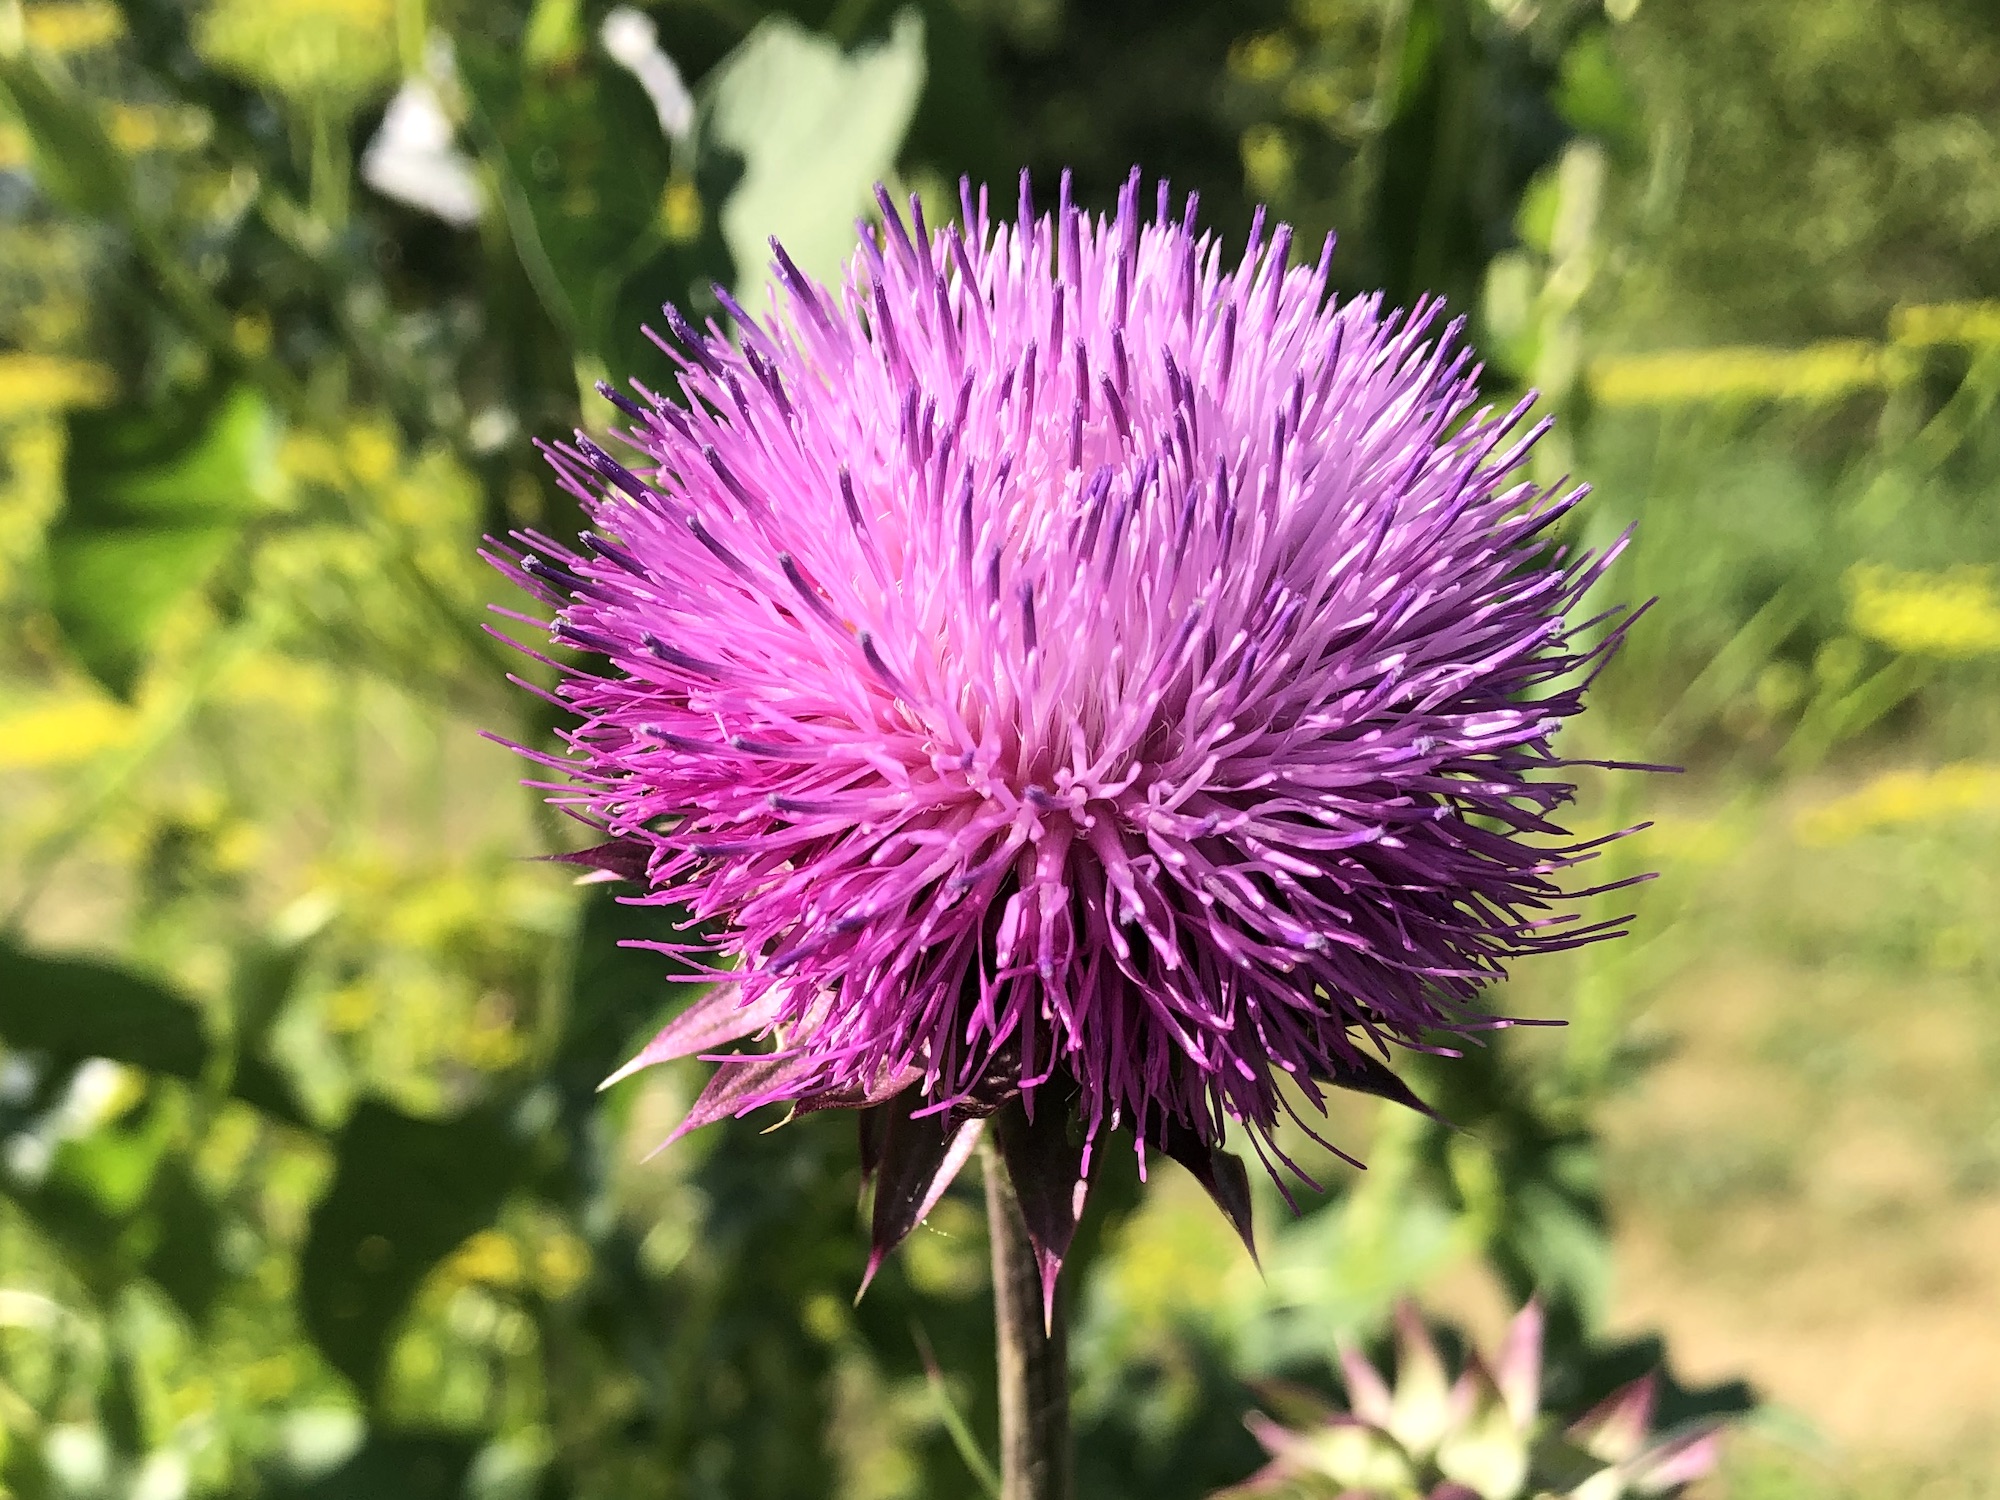 Musk Thistle at rest area 17 on highway 90 on July 2, 2022.